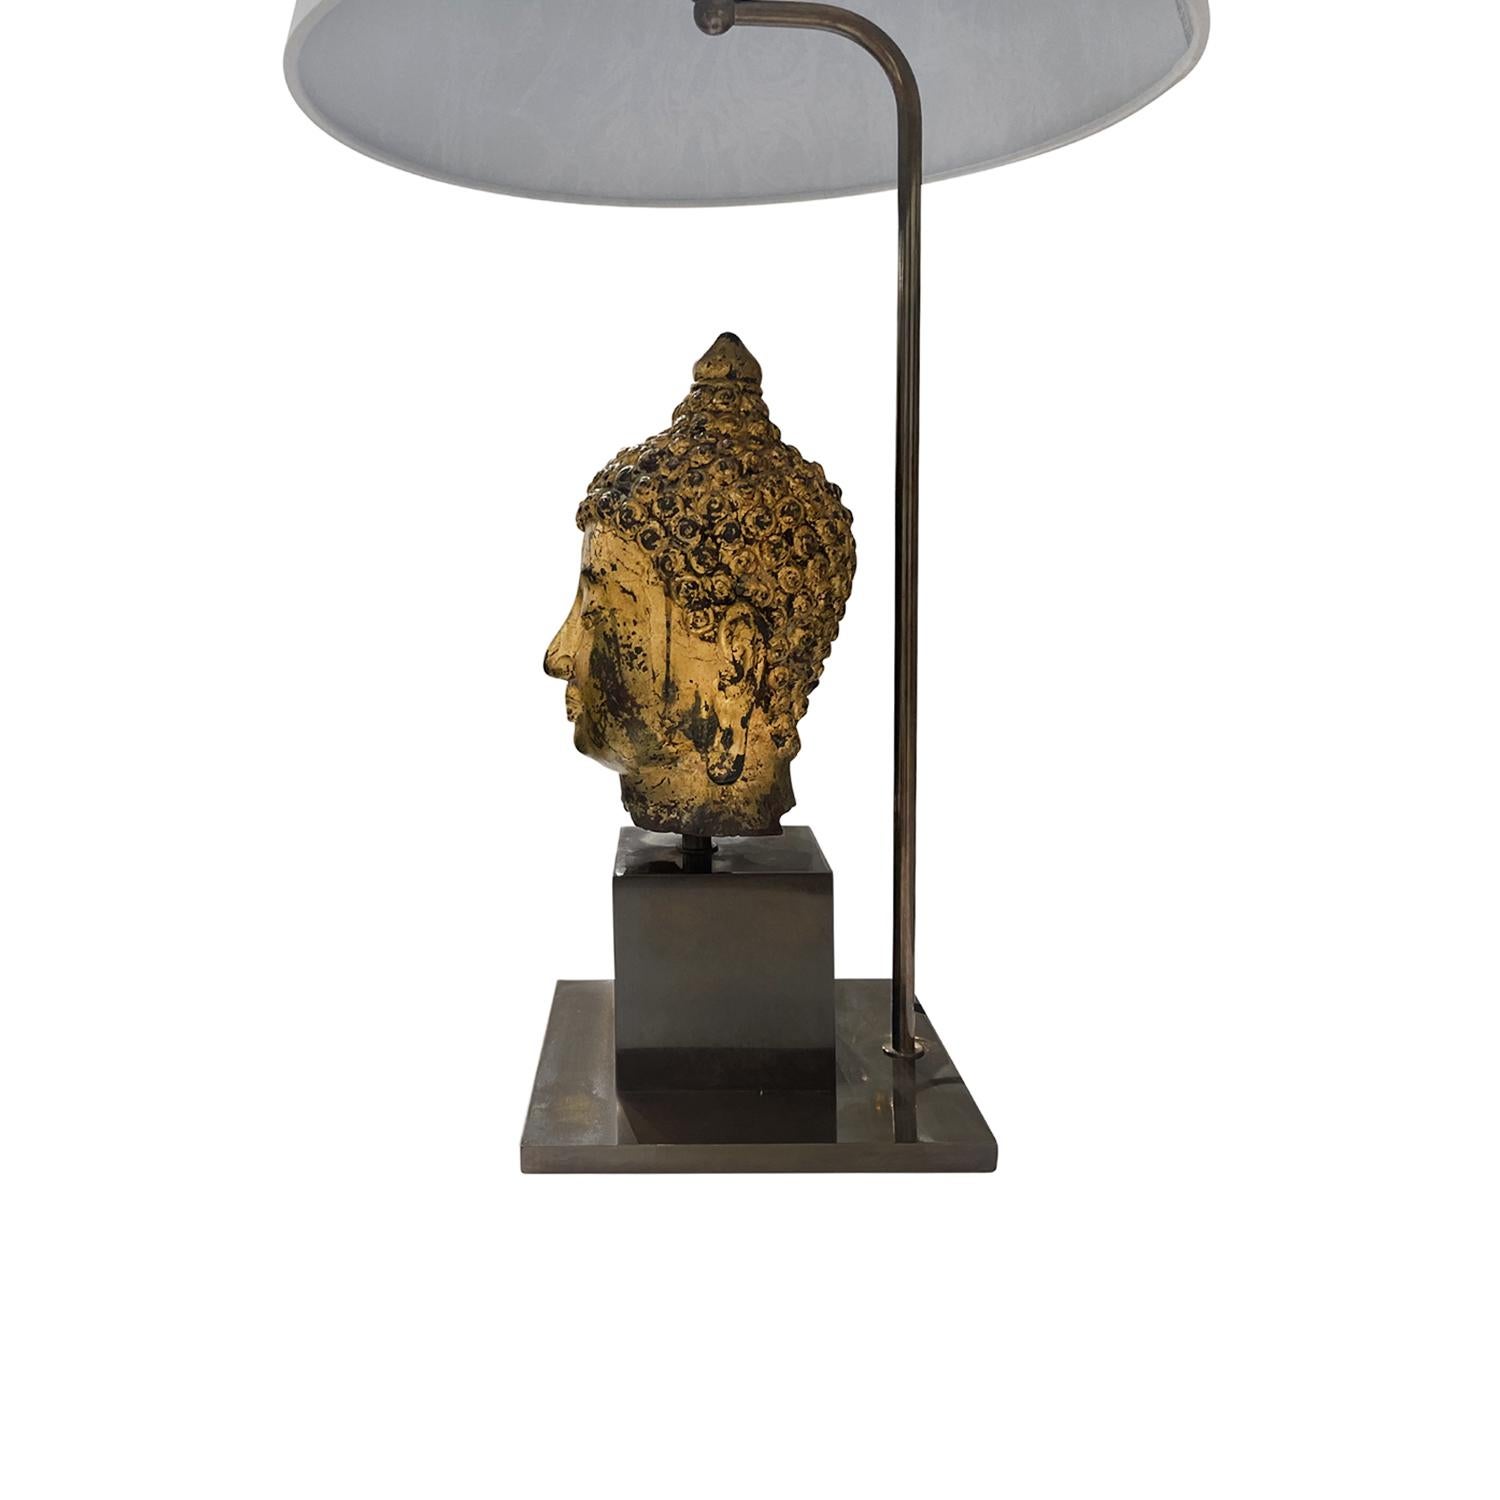 20th Century Gold Asian Metal Buddha Table Lamp, Vintage Wood Light For Sale 2